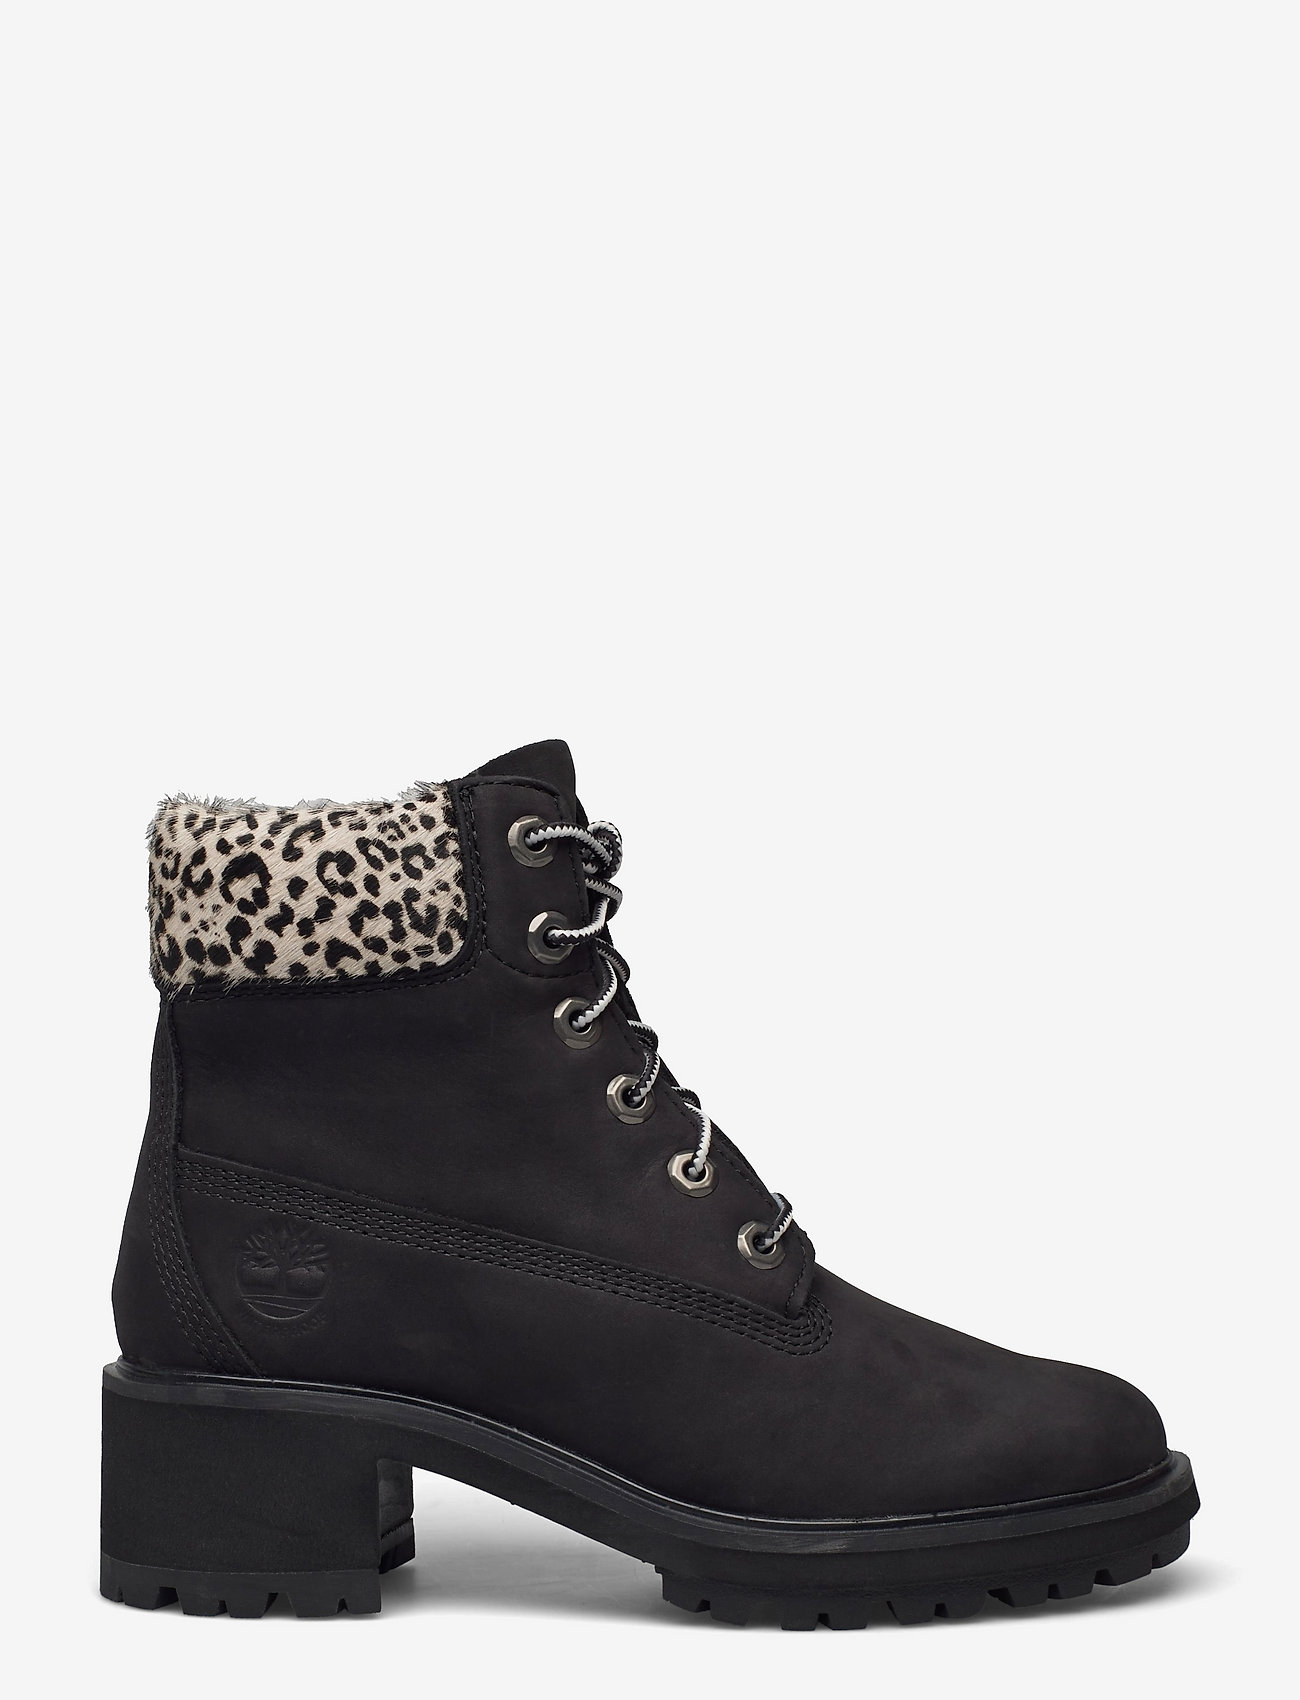 Timberland Kinsley 6 Inch Waterproof Boot - Heeled ankle boots | Boozt.com